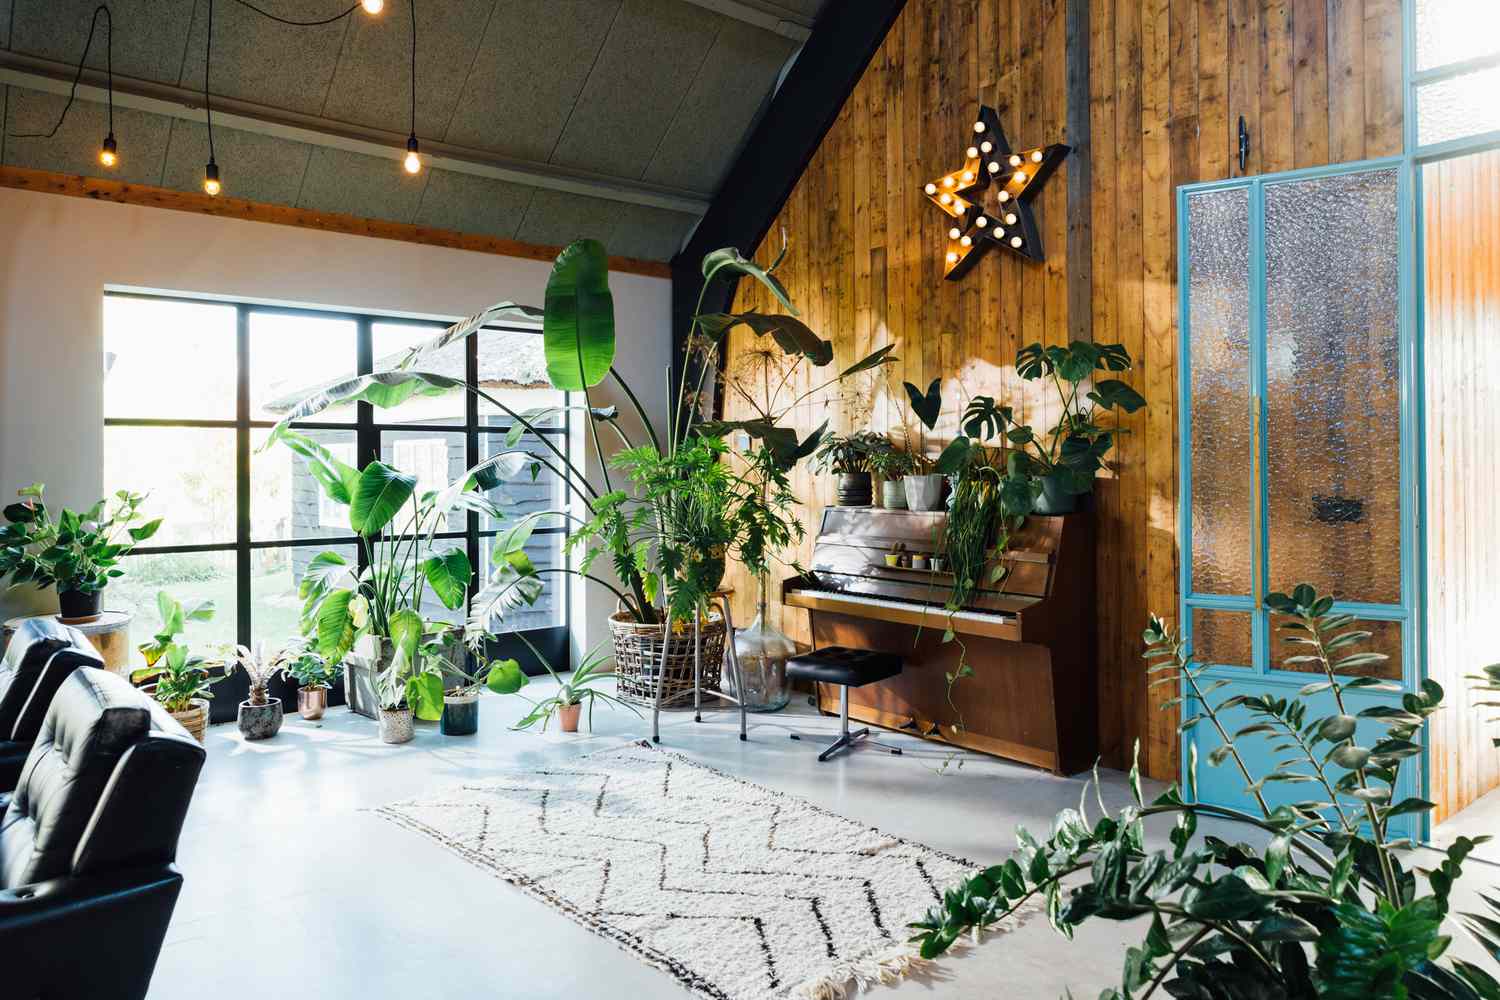 Midcentury modern scandinavian eco lodgle like interior with a lot of green plants and barn wood walls. Piano visible.